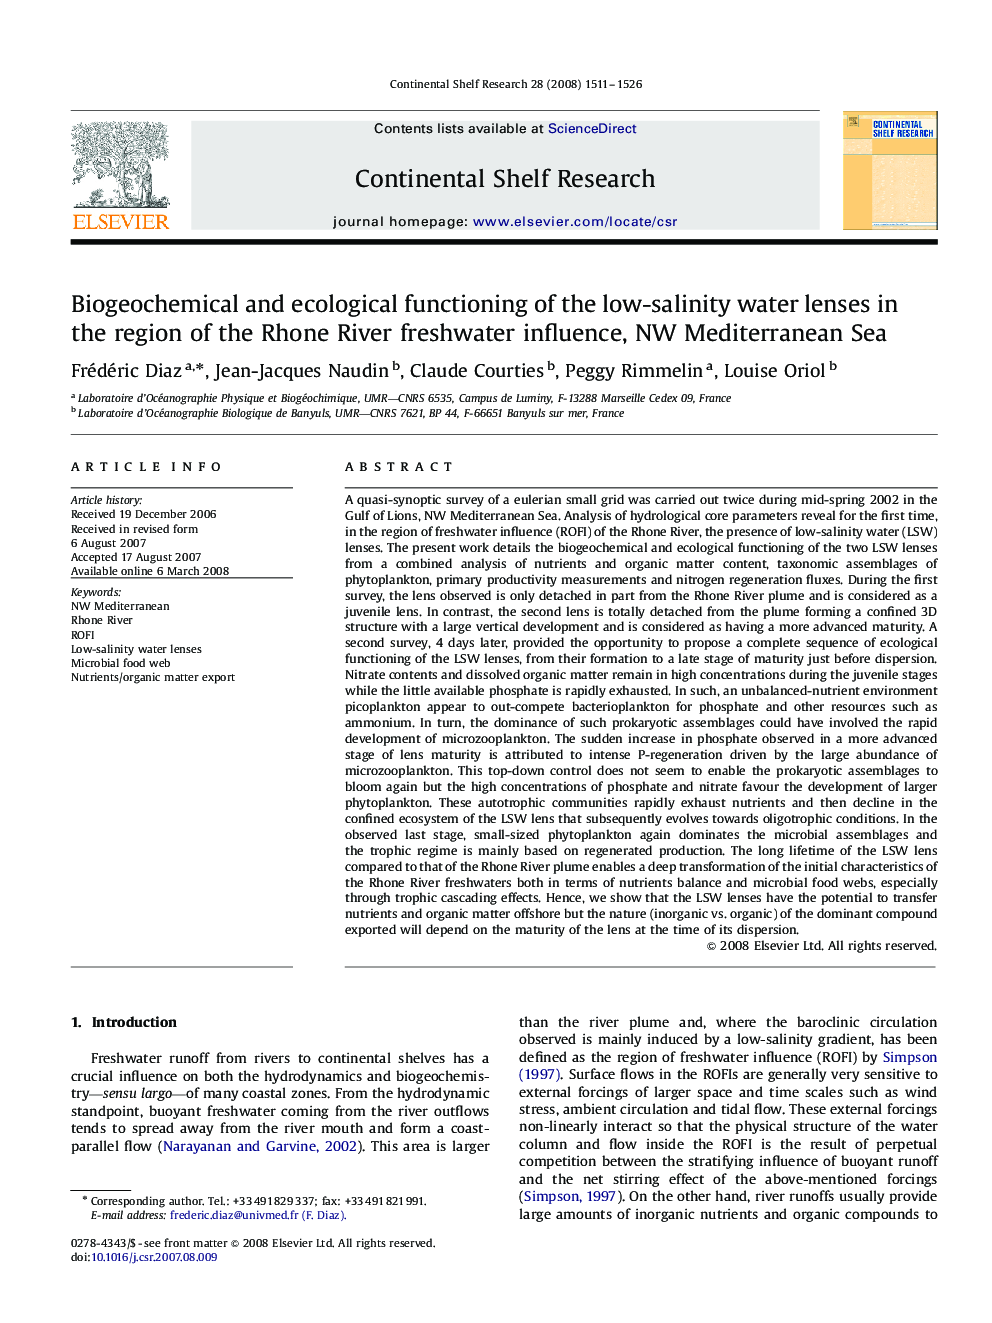 Biogeochemical and ecological functioning of the low-salinity water lenses in the region of the Rhone River freshwater influence, NW Mediterranean Sea